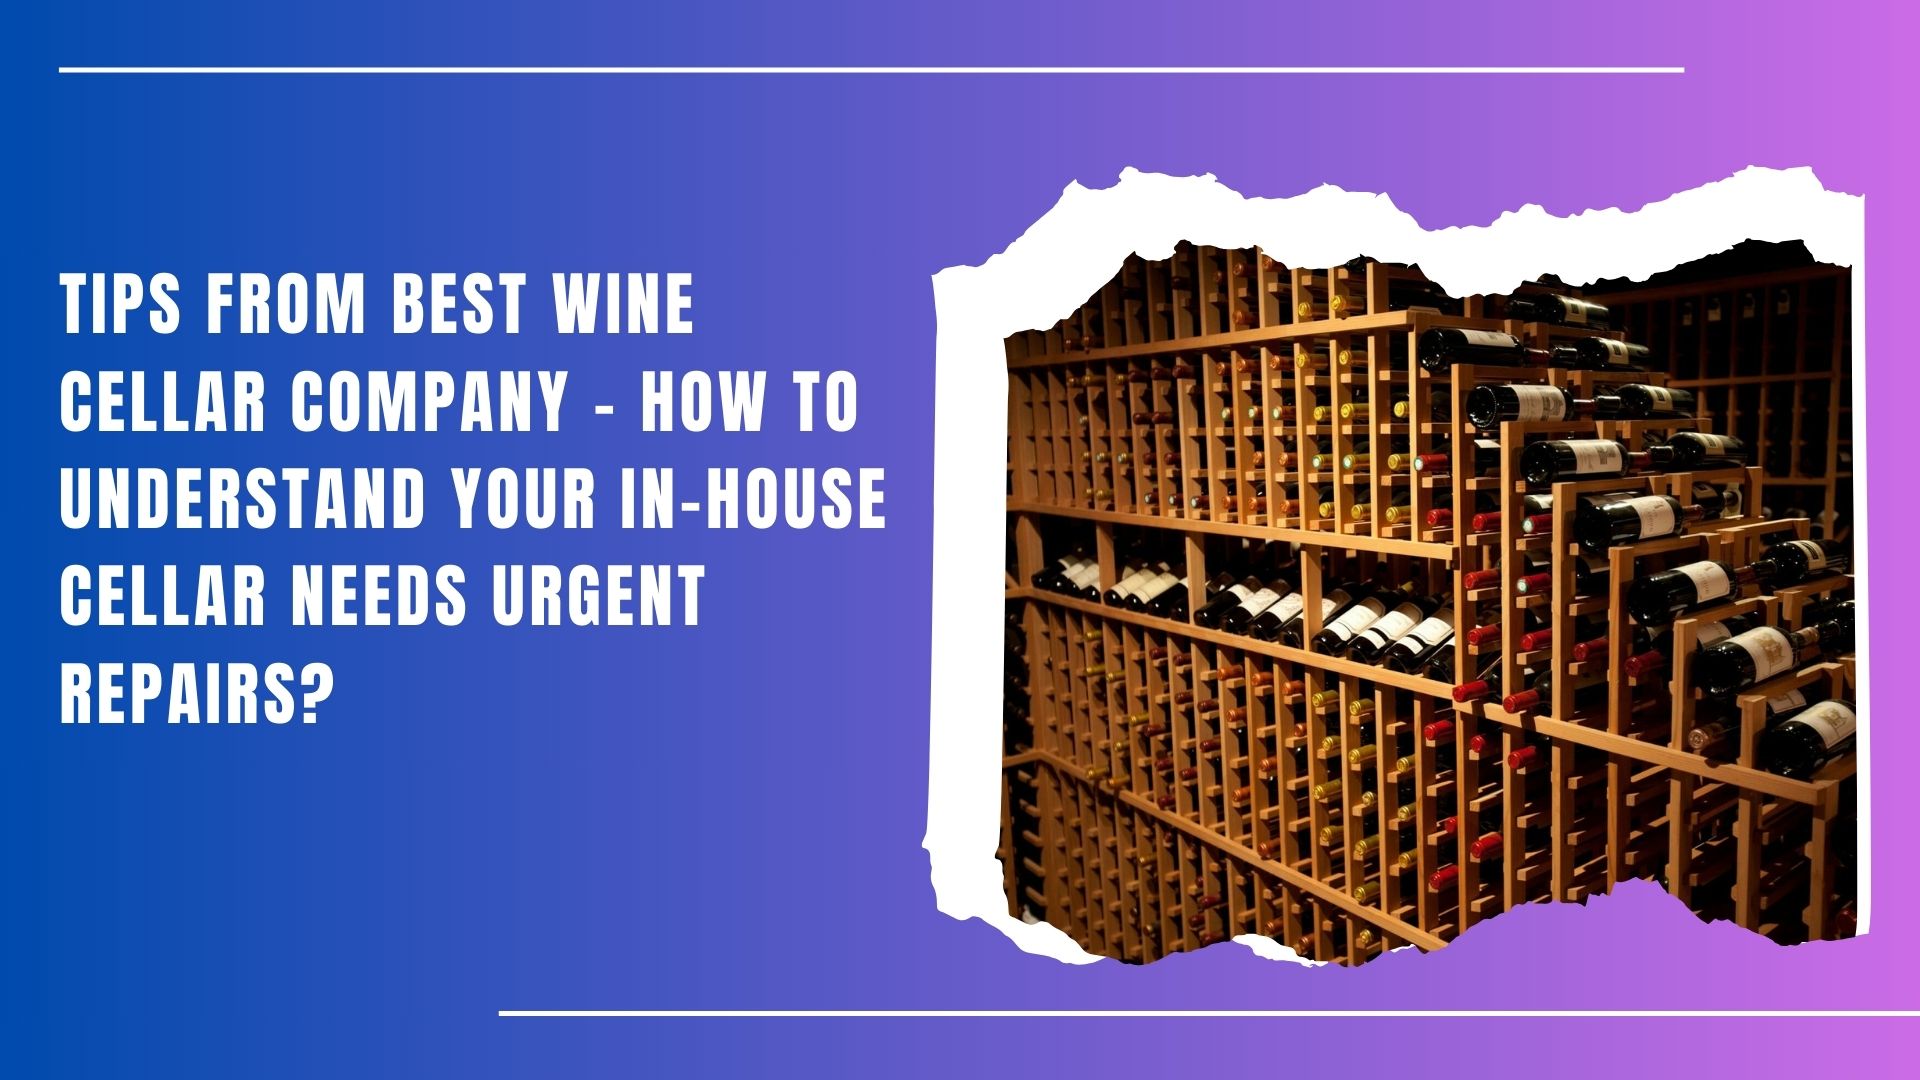 Does Your Wine Collection Need Large Wine Cellar Racks? Let’s See What Wine Experts are Saying